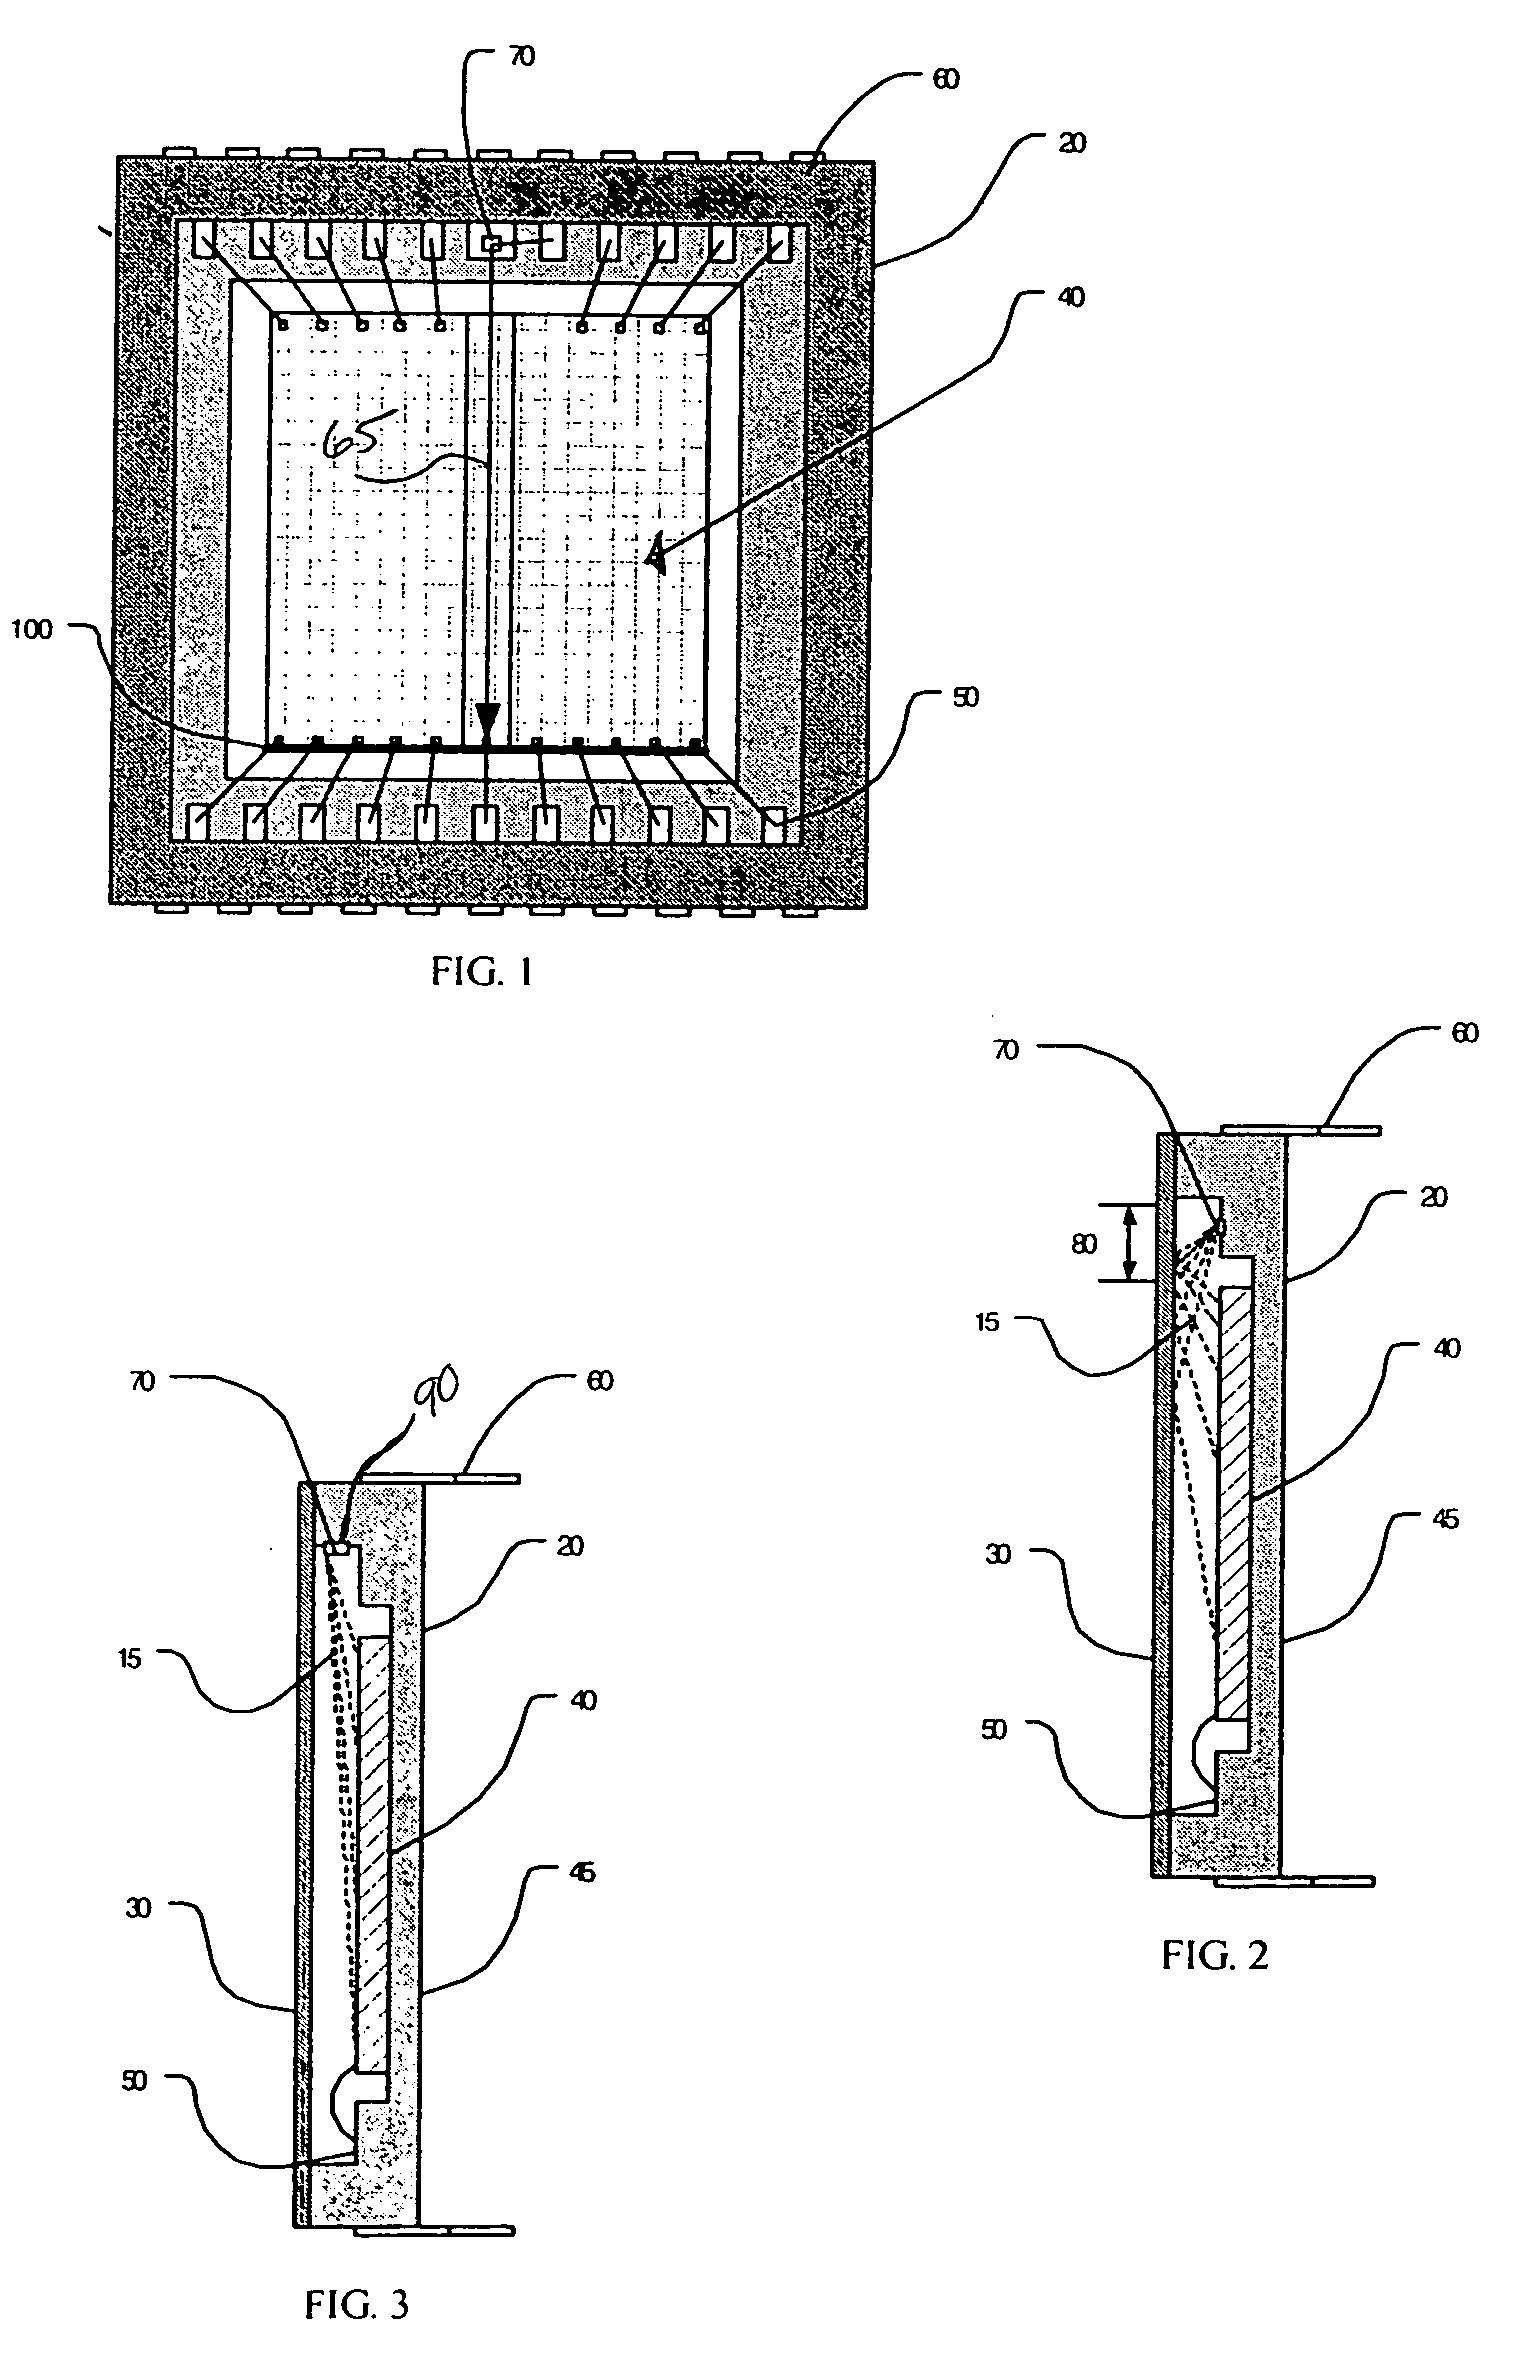 Method and apparatus for calibrating and correcting tone scale differences between two or more outputs of a CCD